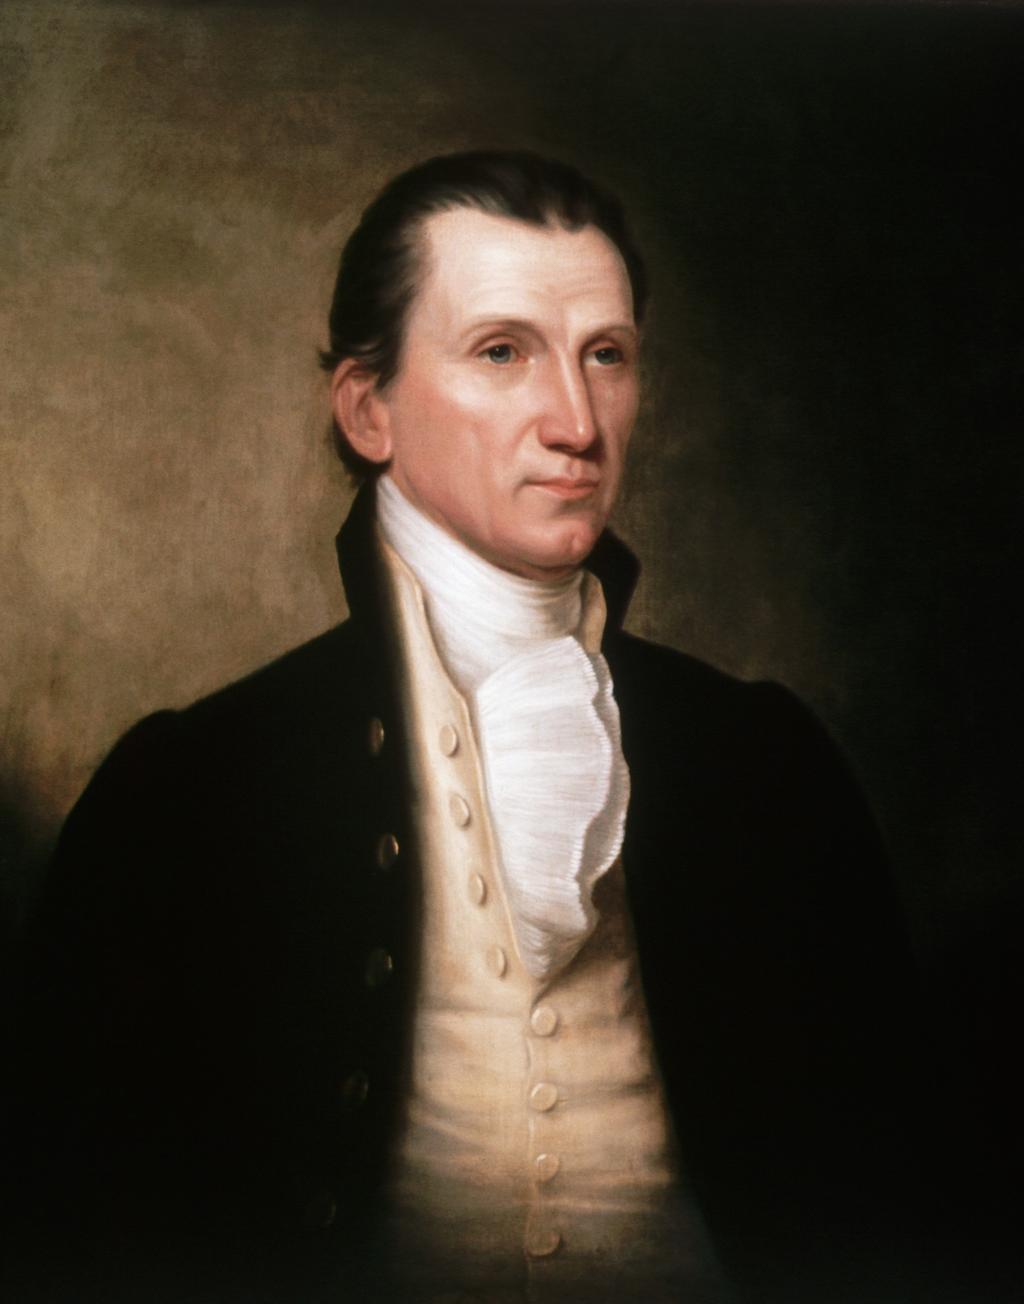 I. In the election of 1816 James Monroe (D-R) ran against Rufus King (Federalist) II.